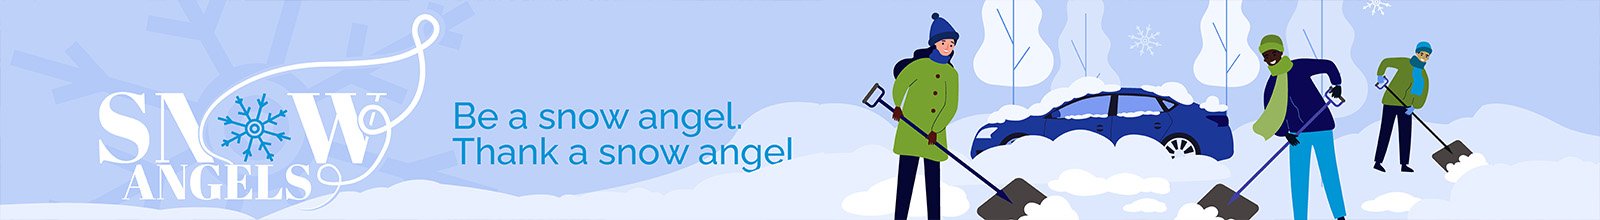 Snow Angels banner with an illustration of three people shoveling snow, the Snow Angels logo, and text reading "Be a snow angel. Thank a snow angel."